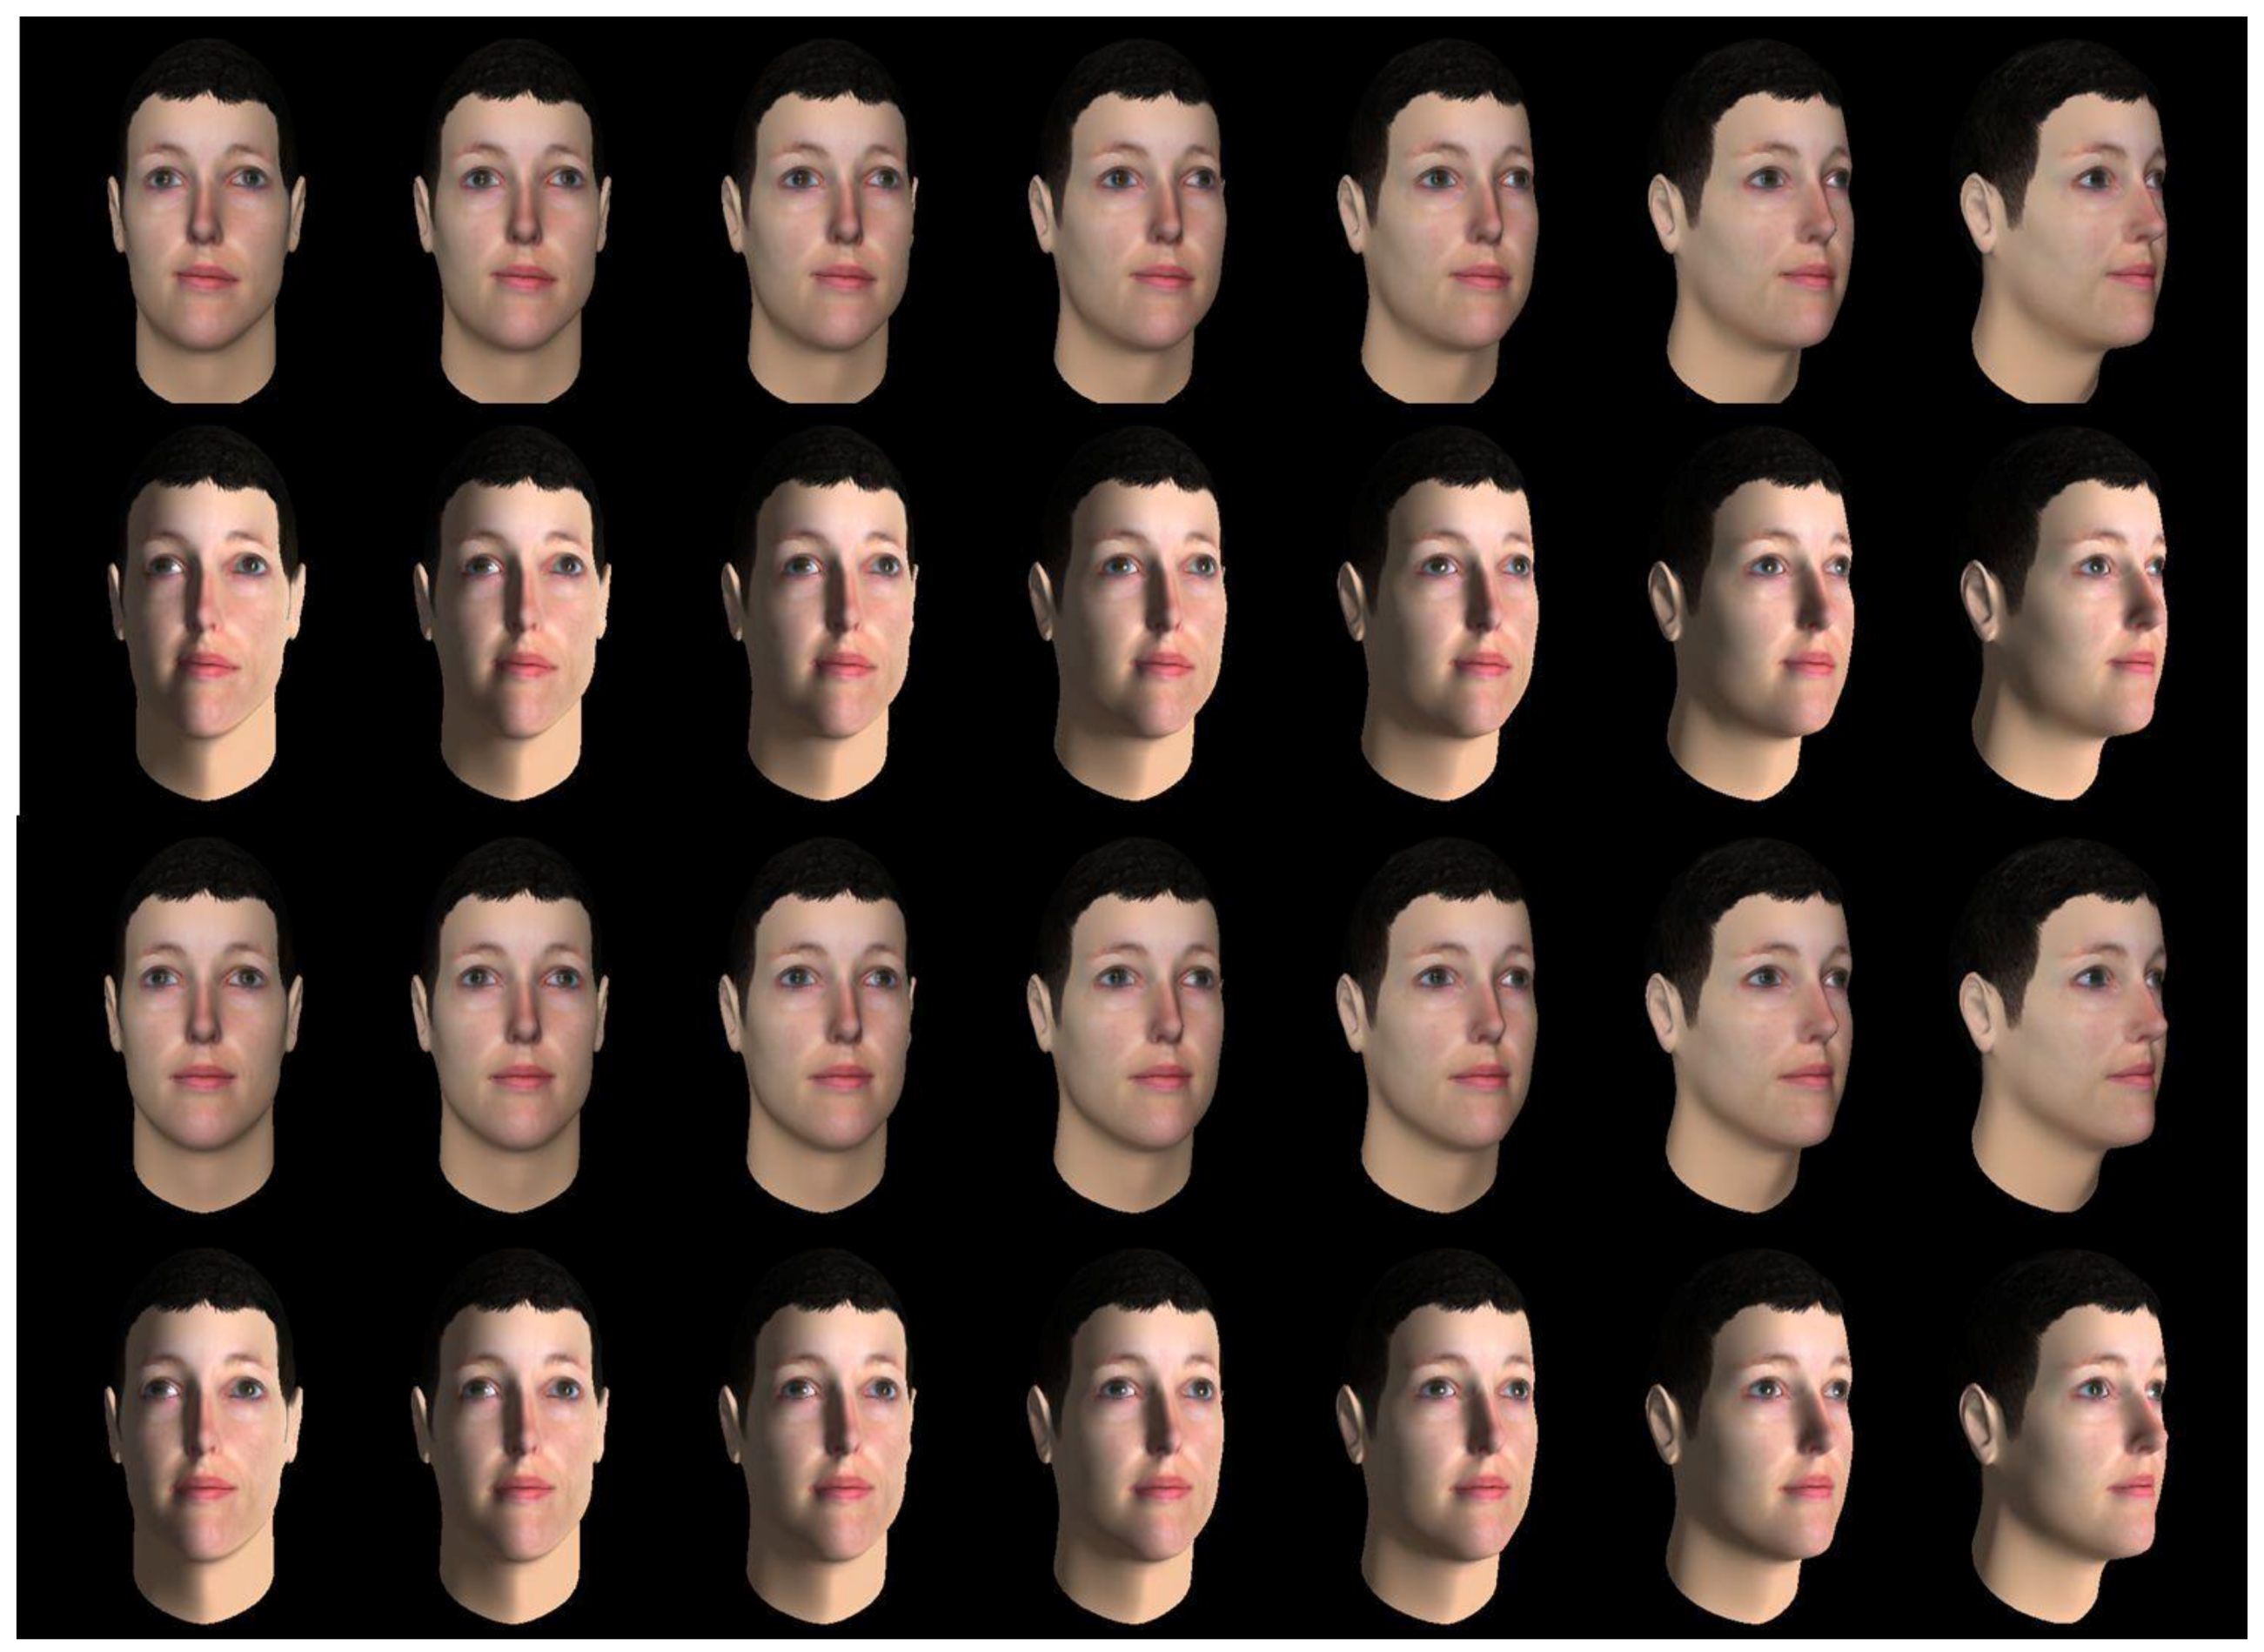 images of patients at different symmetry levels based on the Sn-n and